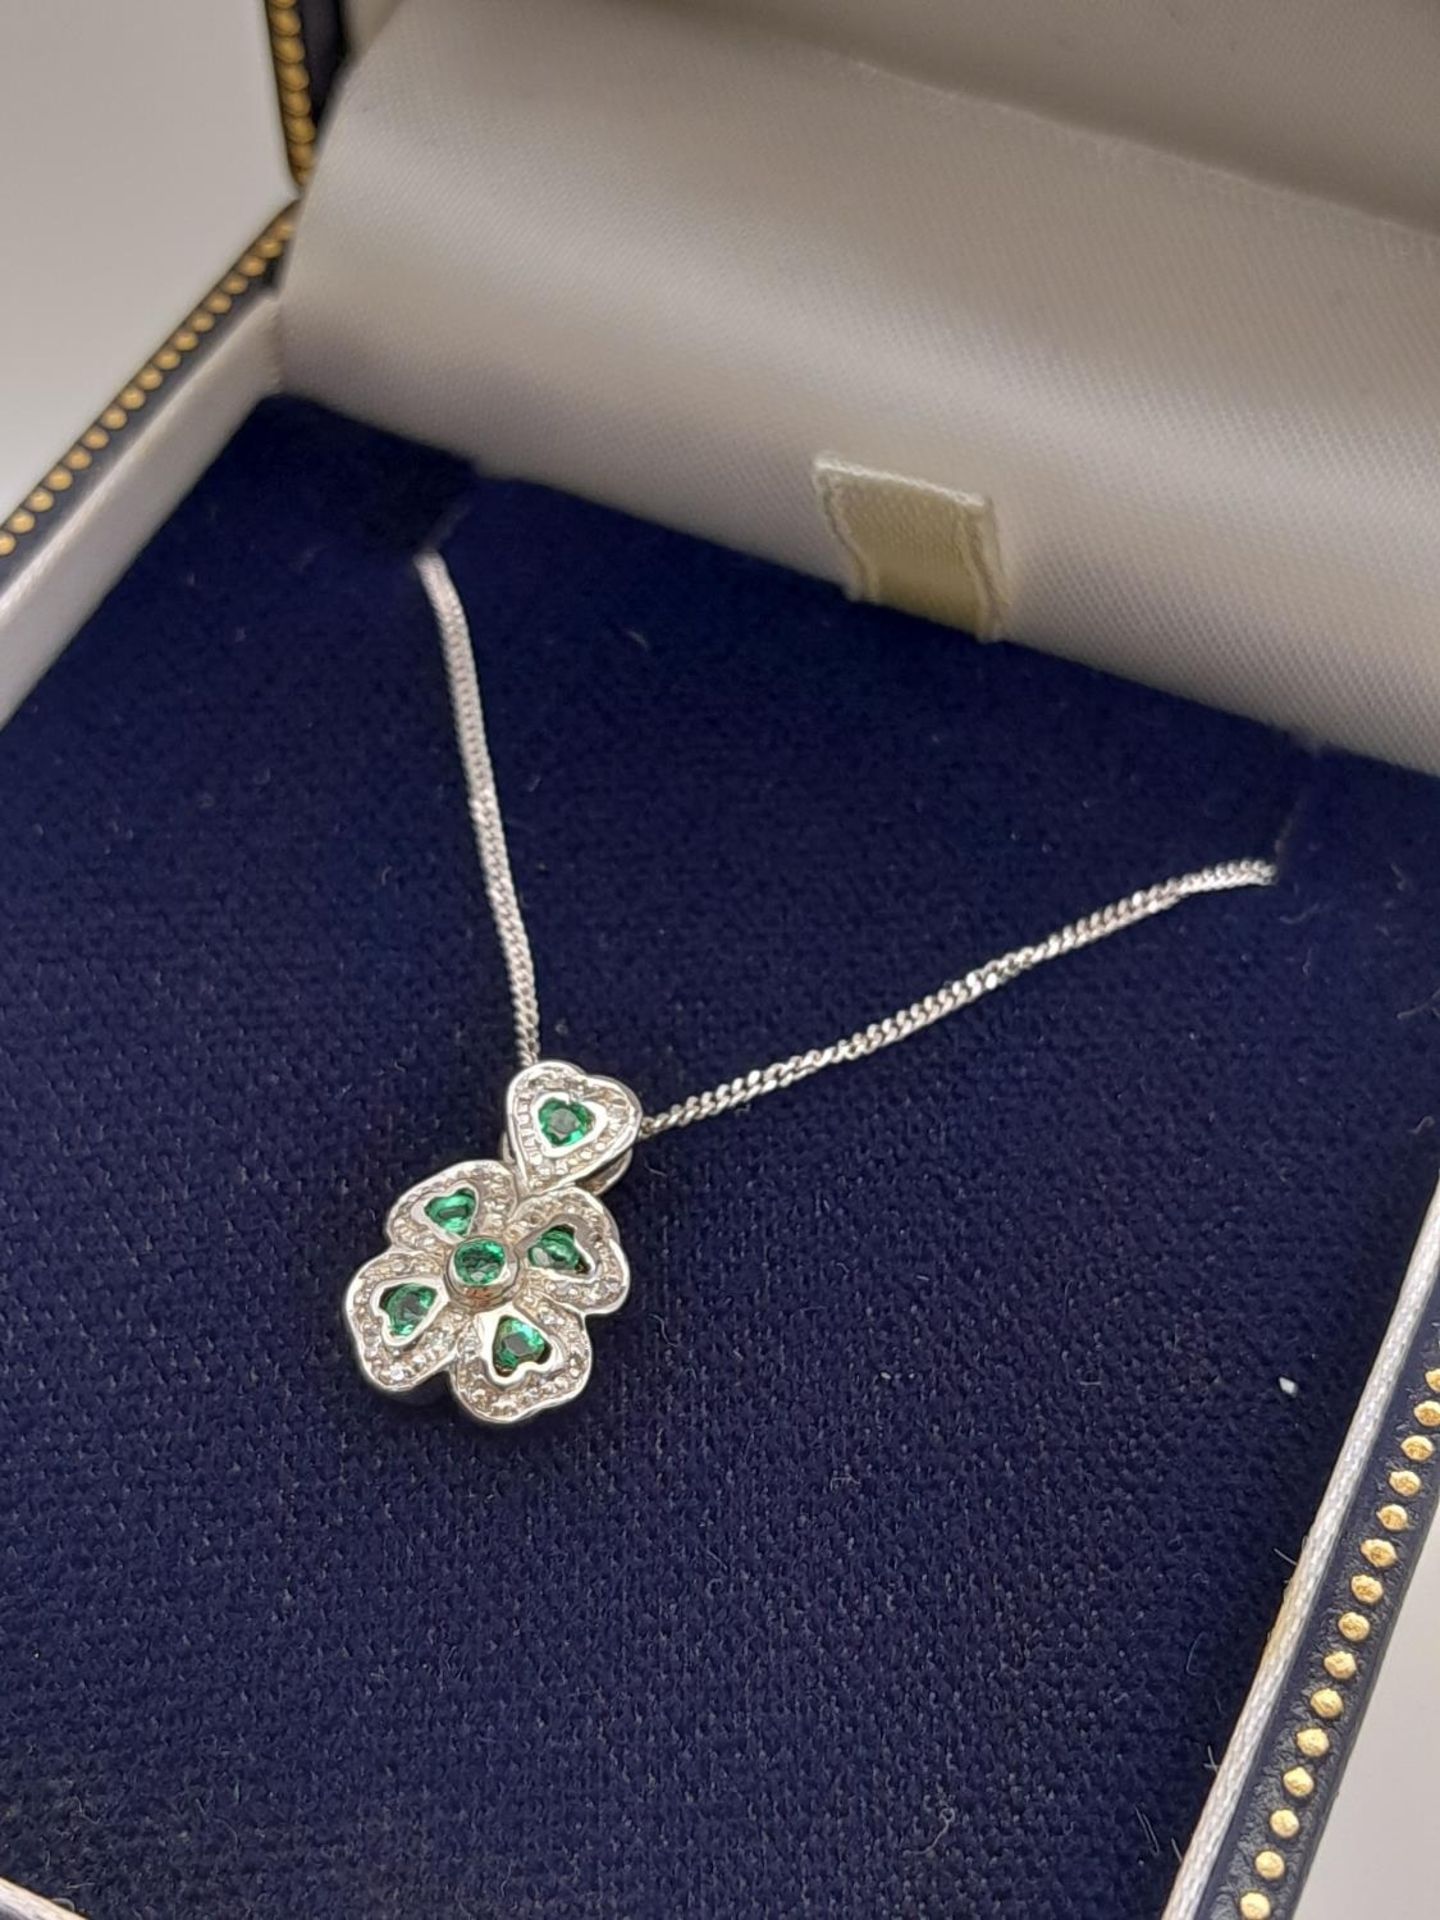 A 9K White Gold Emerald Clover Pendant on Necklace. Comes with presentation case. 1.4cm pendant, - Image 6 of 8